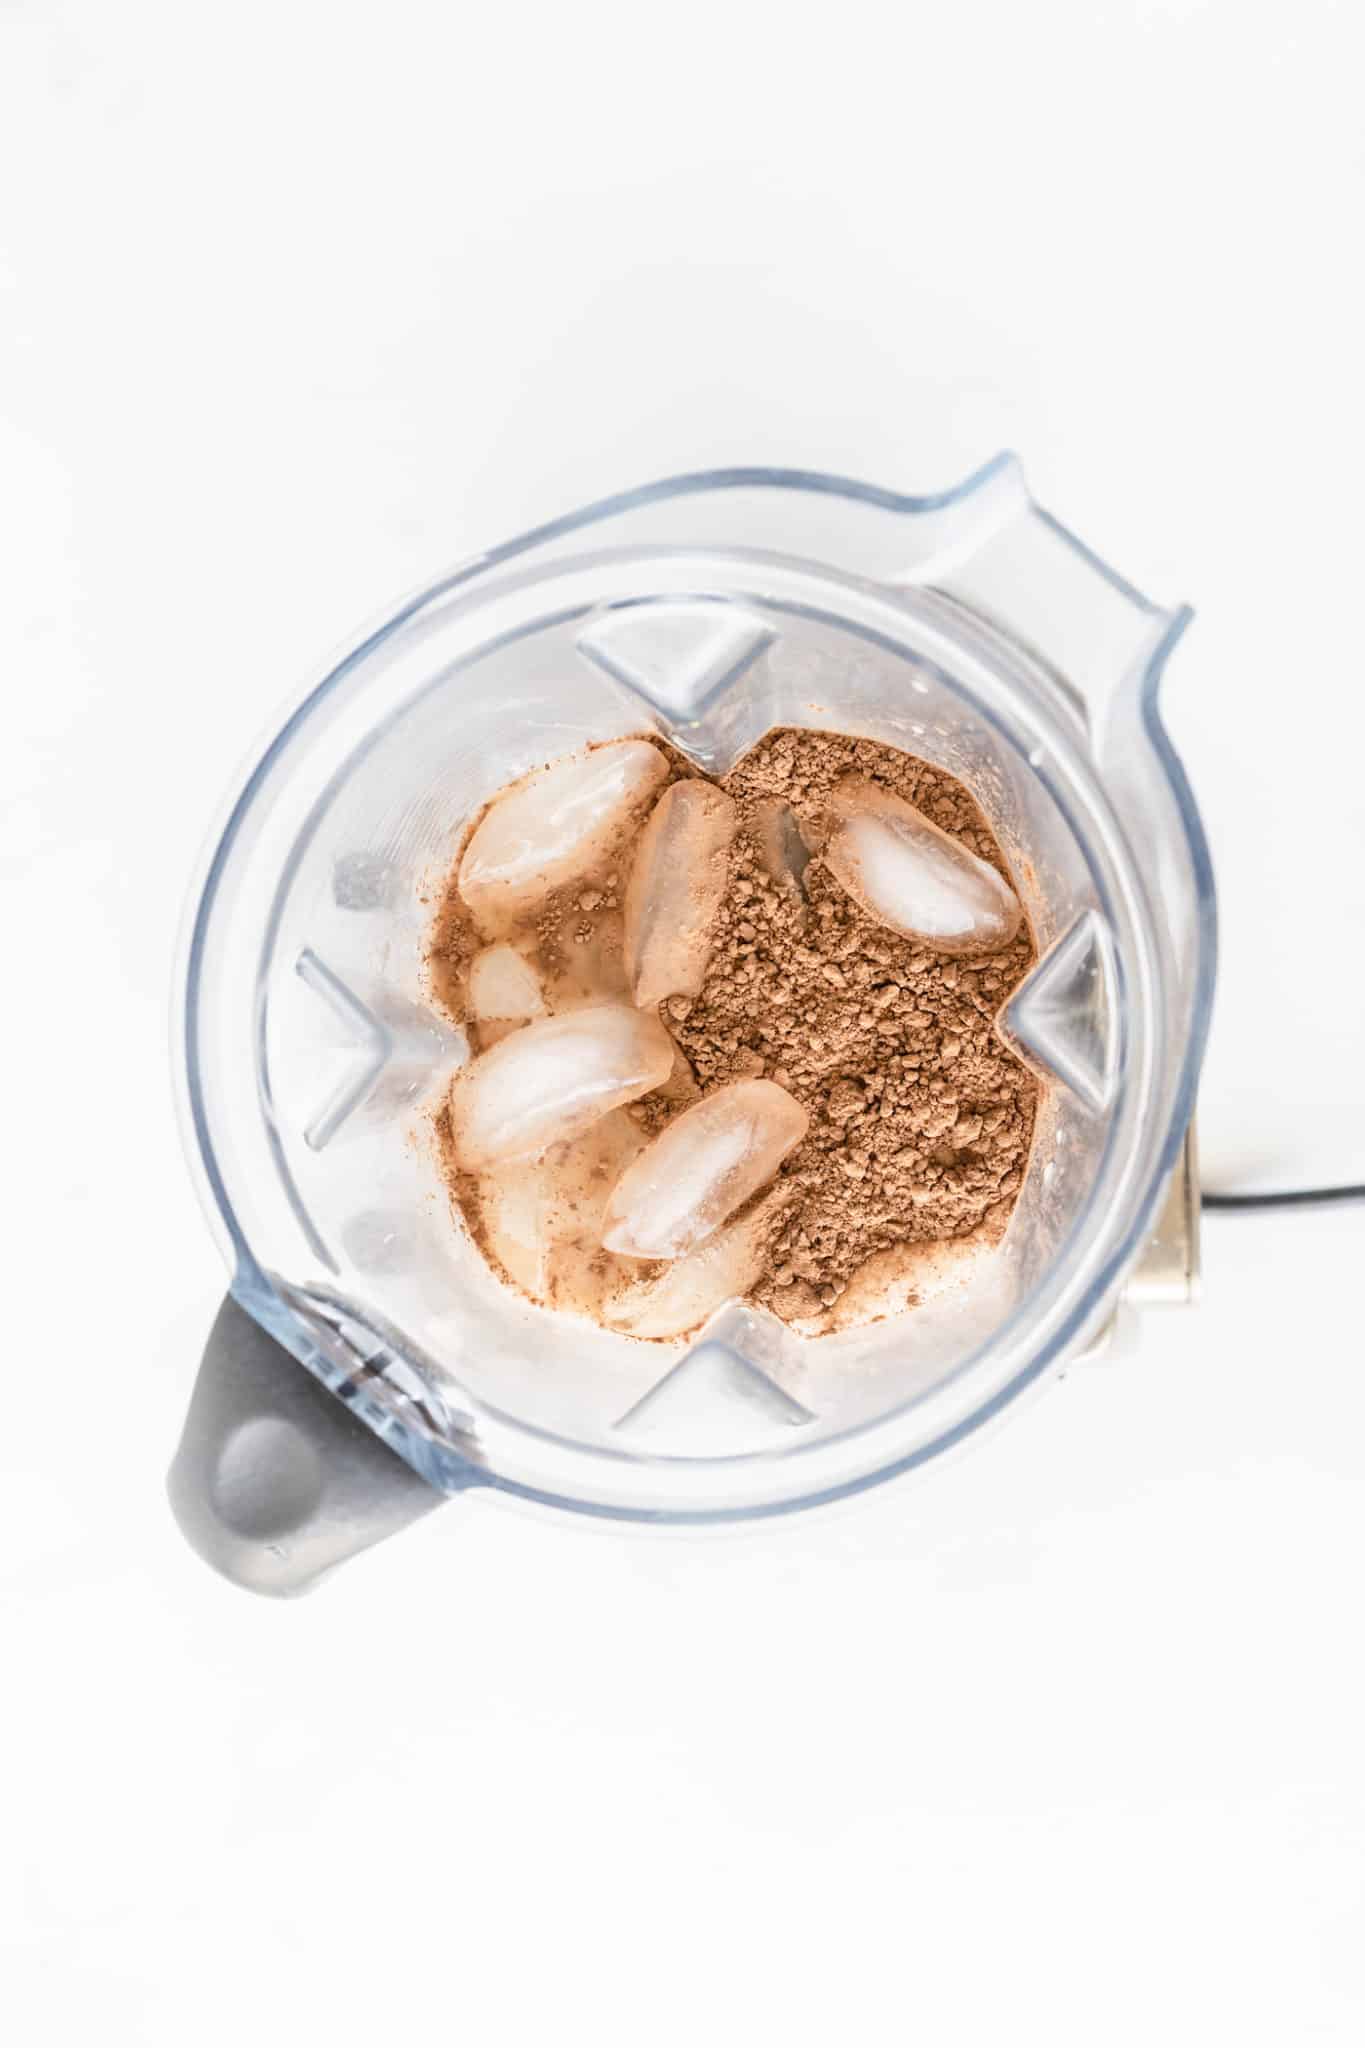 Cocoa powder and ice in a blender